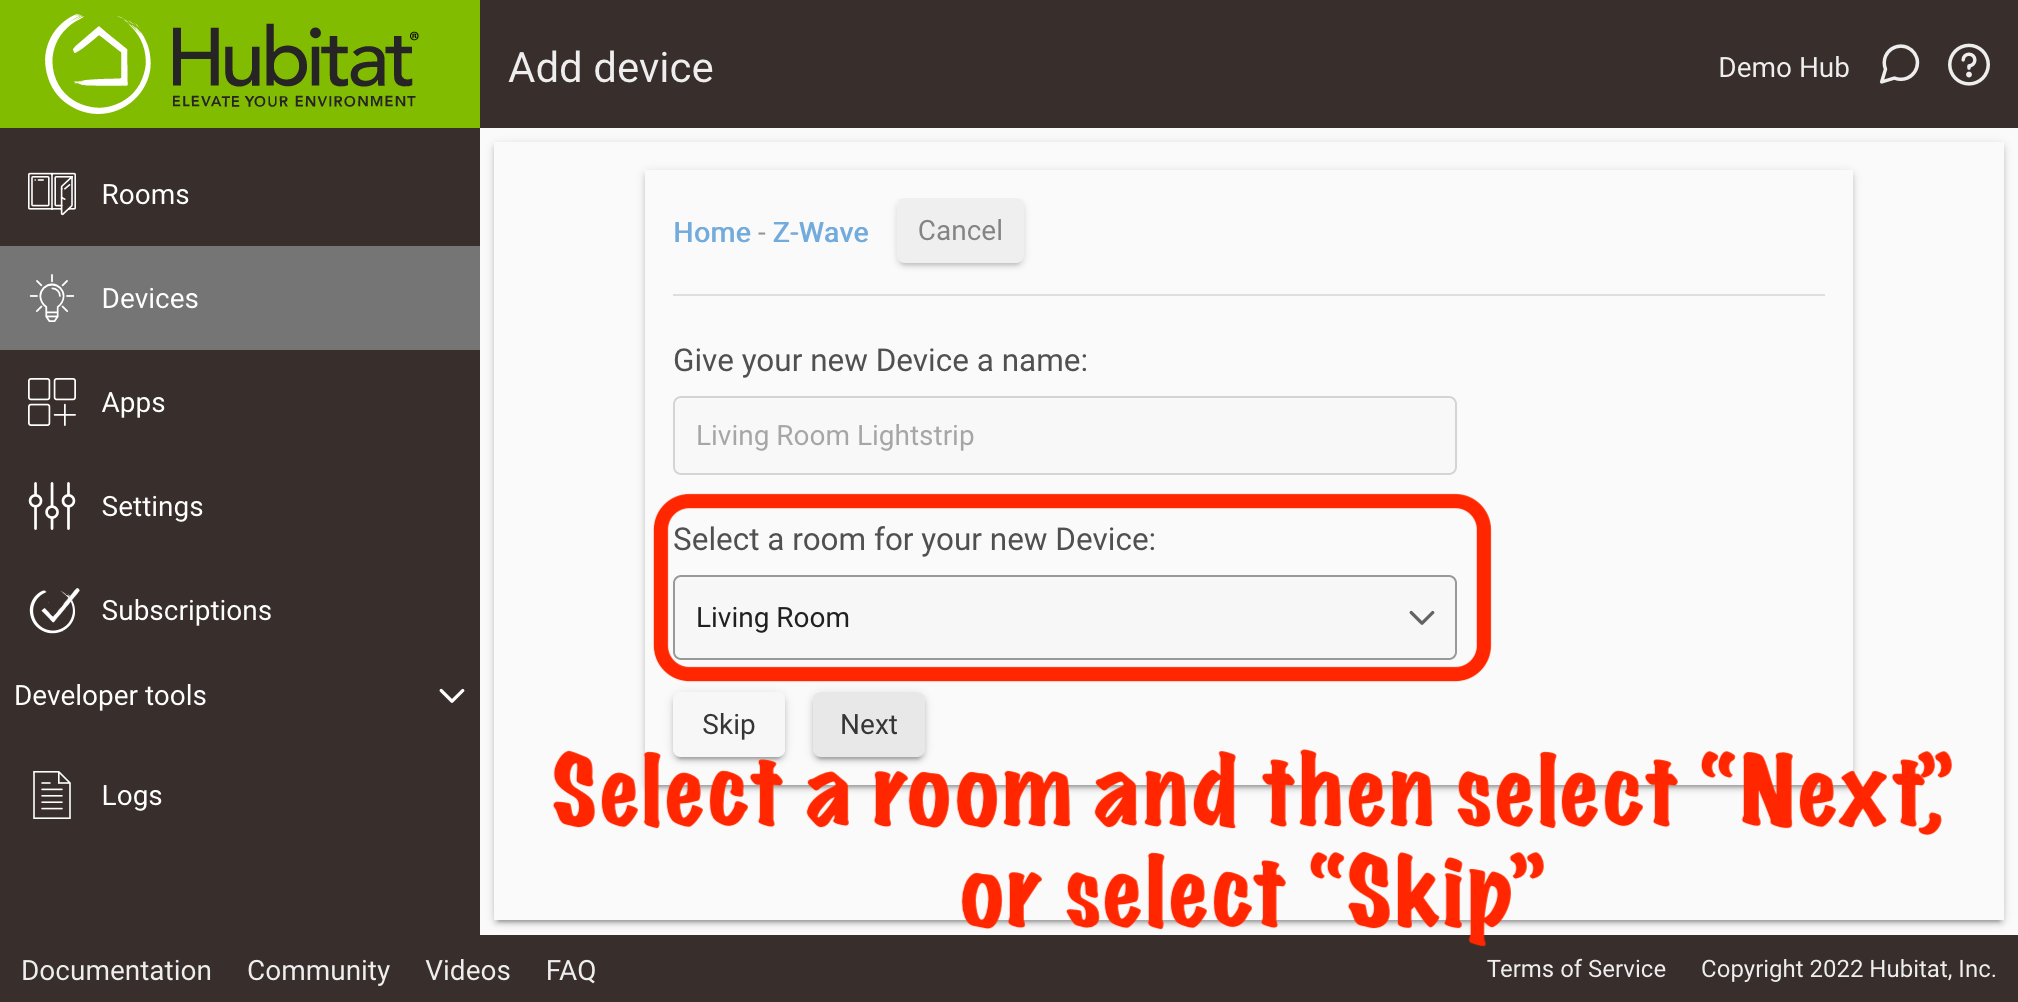 Screenshot: "Select a room for your device" with "Skip" or "Next" buttons